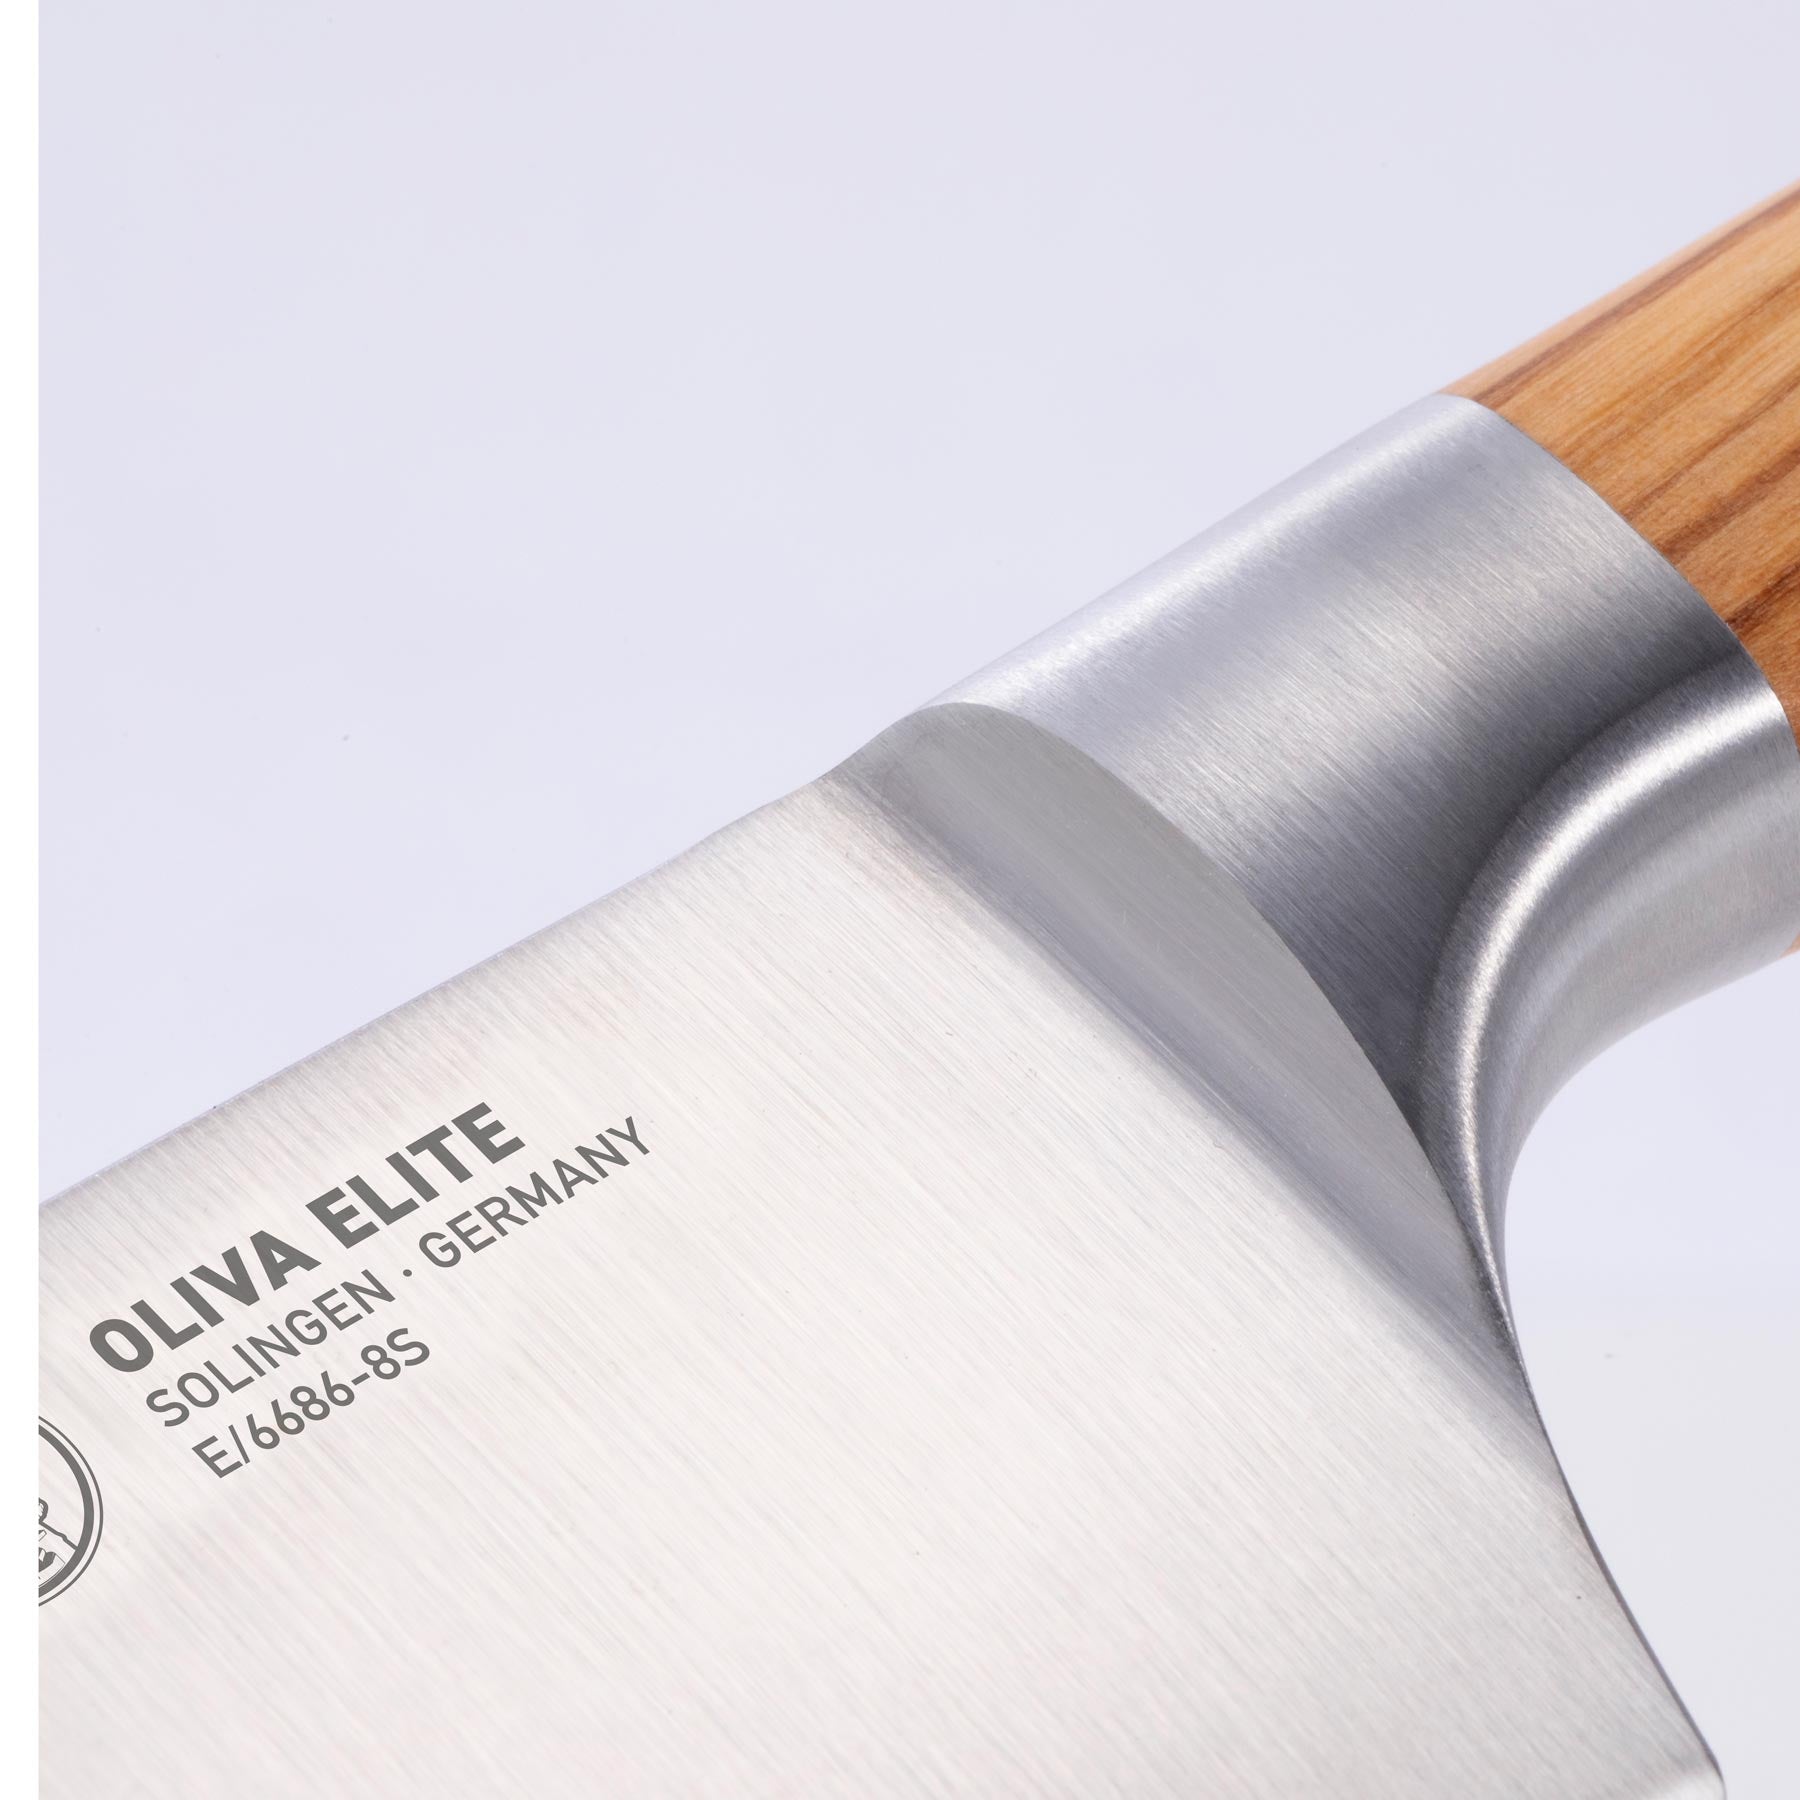 Messermeister Oliva Elite Knife Collection - Assorted Styles